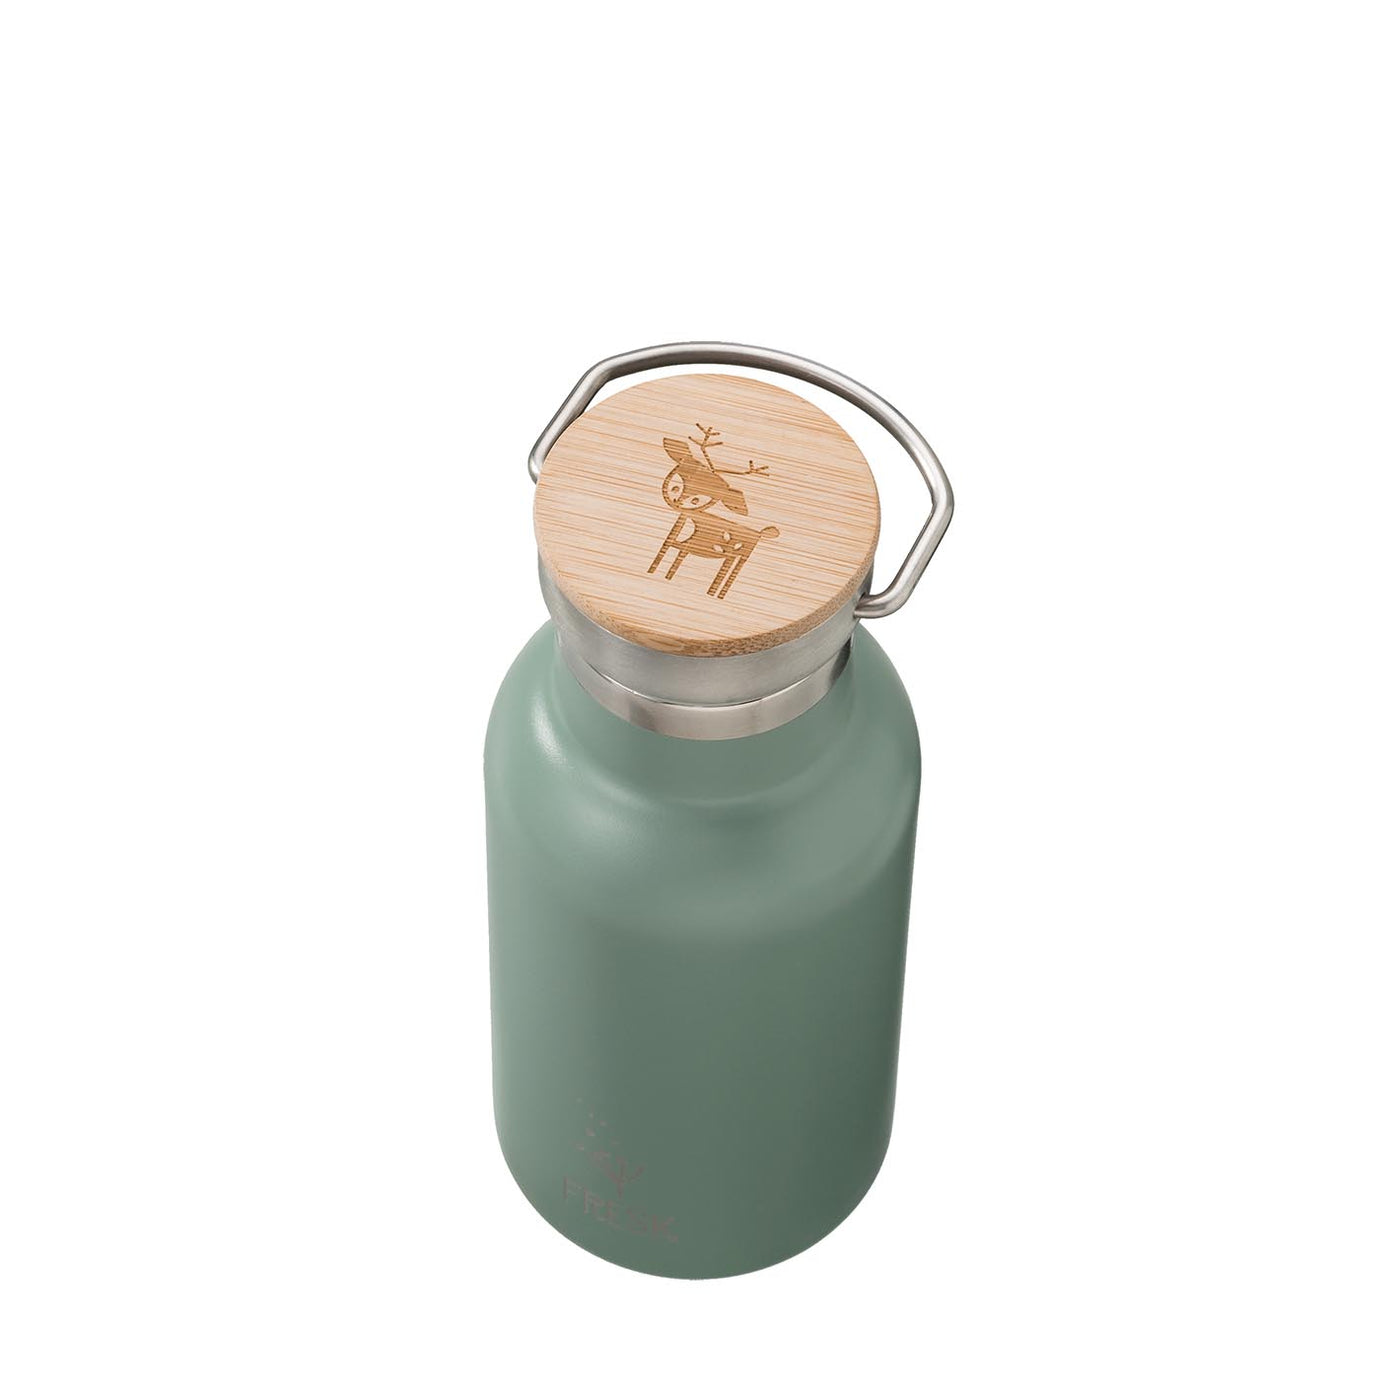 Fresk Trinkflasche 350ml, chinois green